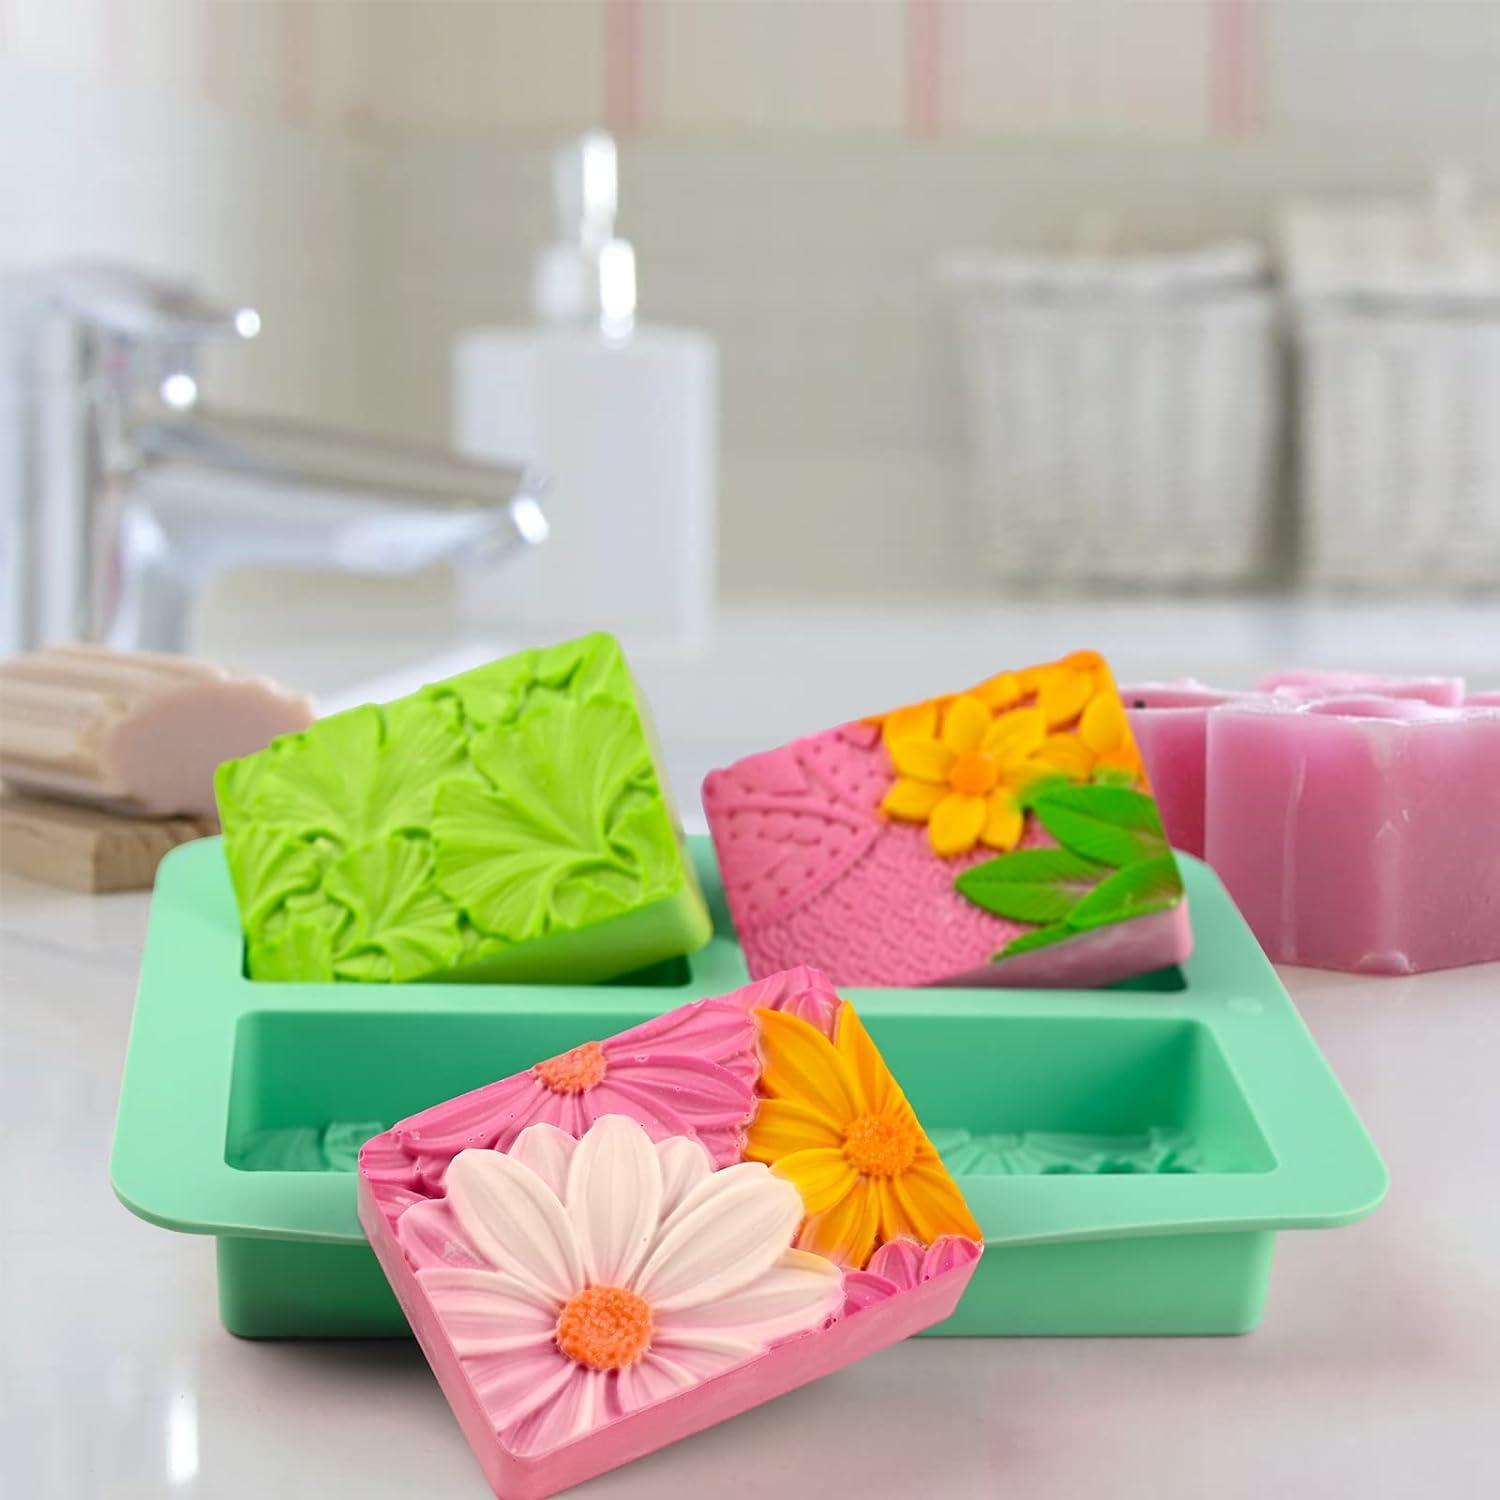 HUAKENER Silicone Soap Molds 2 Pack 4-Cavity Rectangle Soap Mold